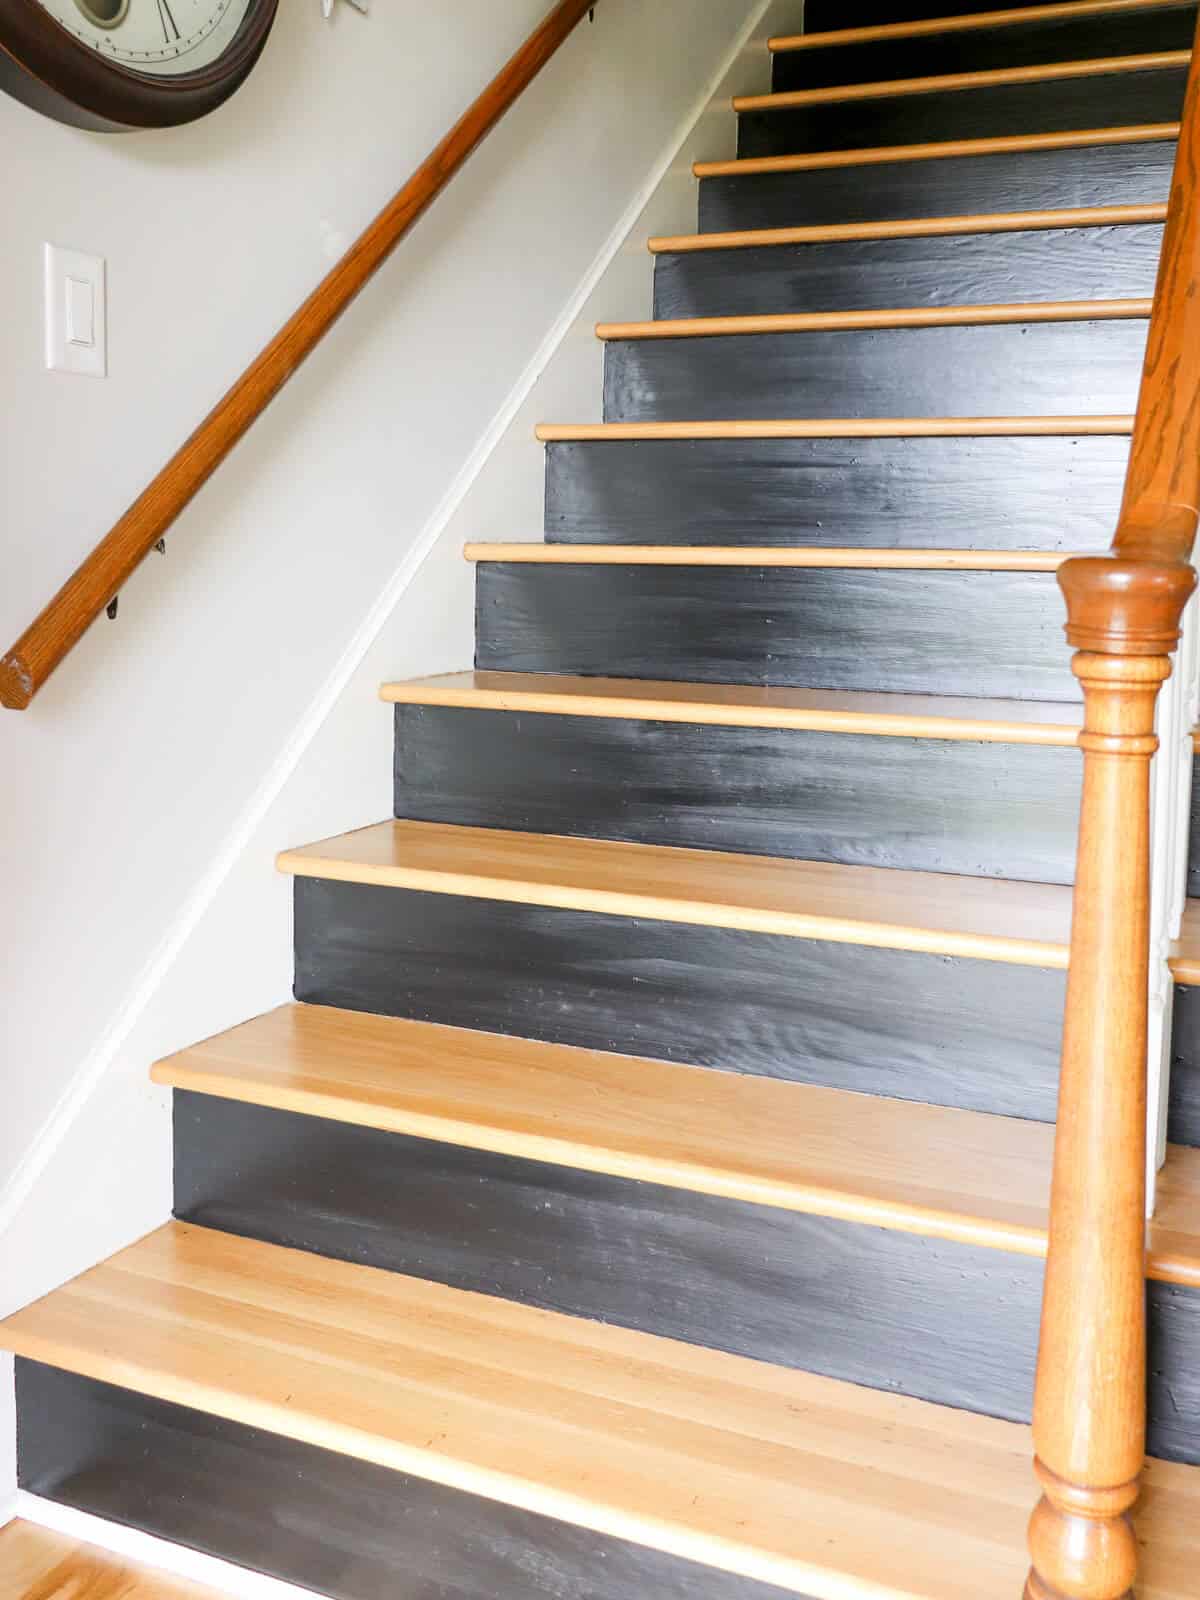 staircase with wood treads and risers getting painted black